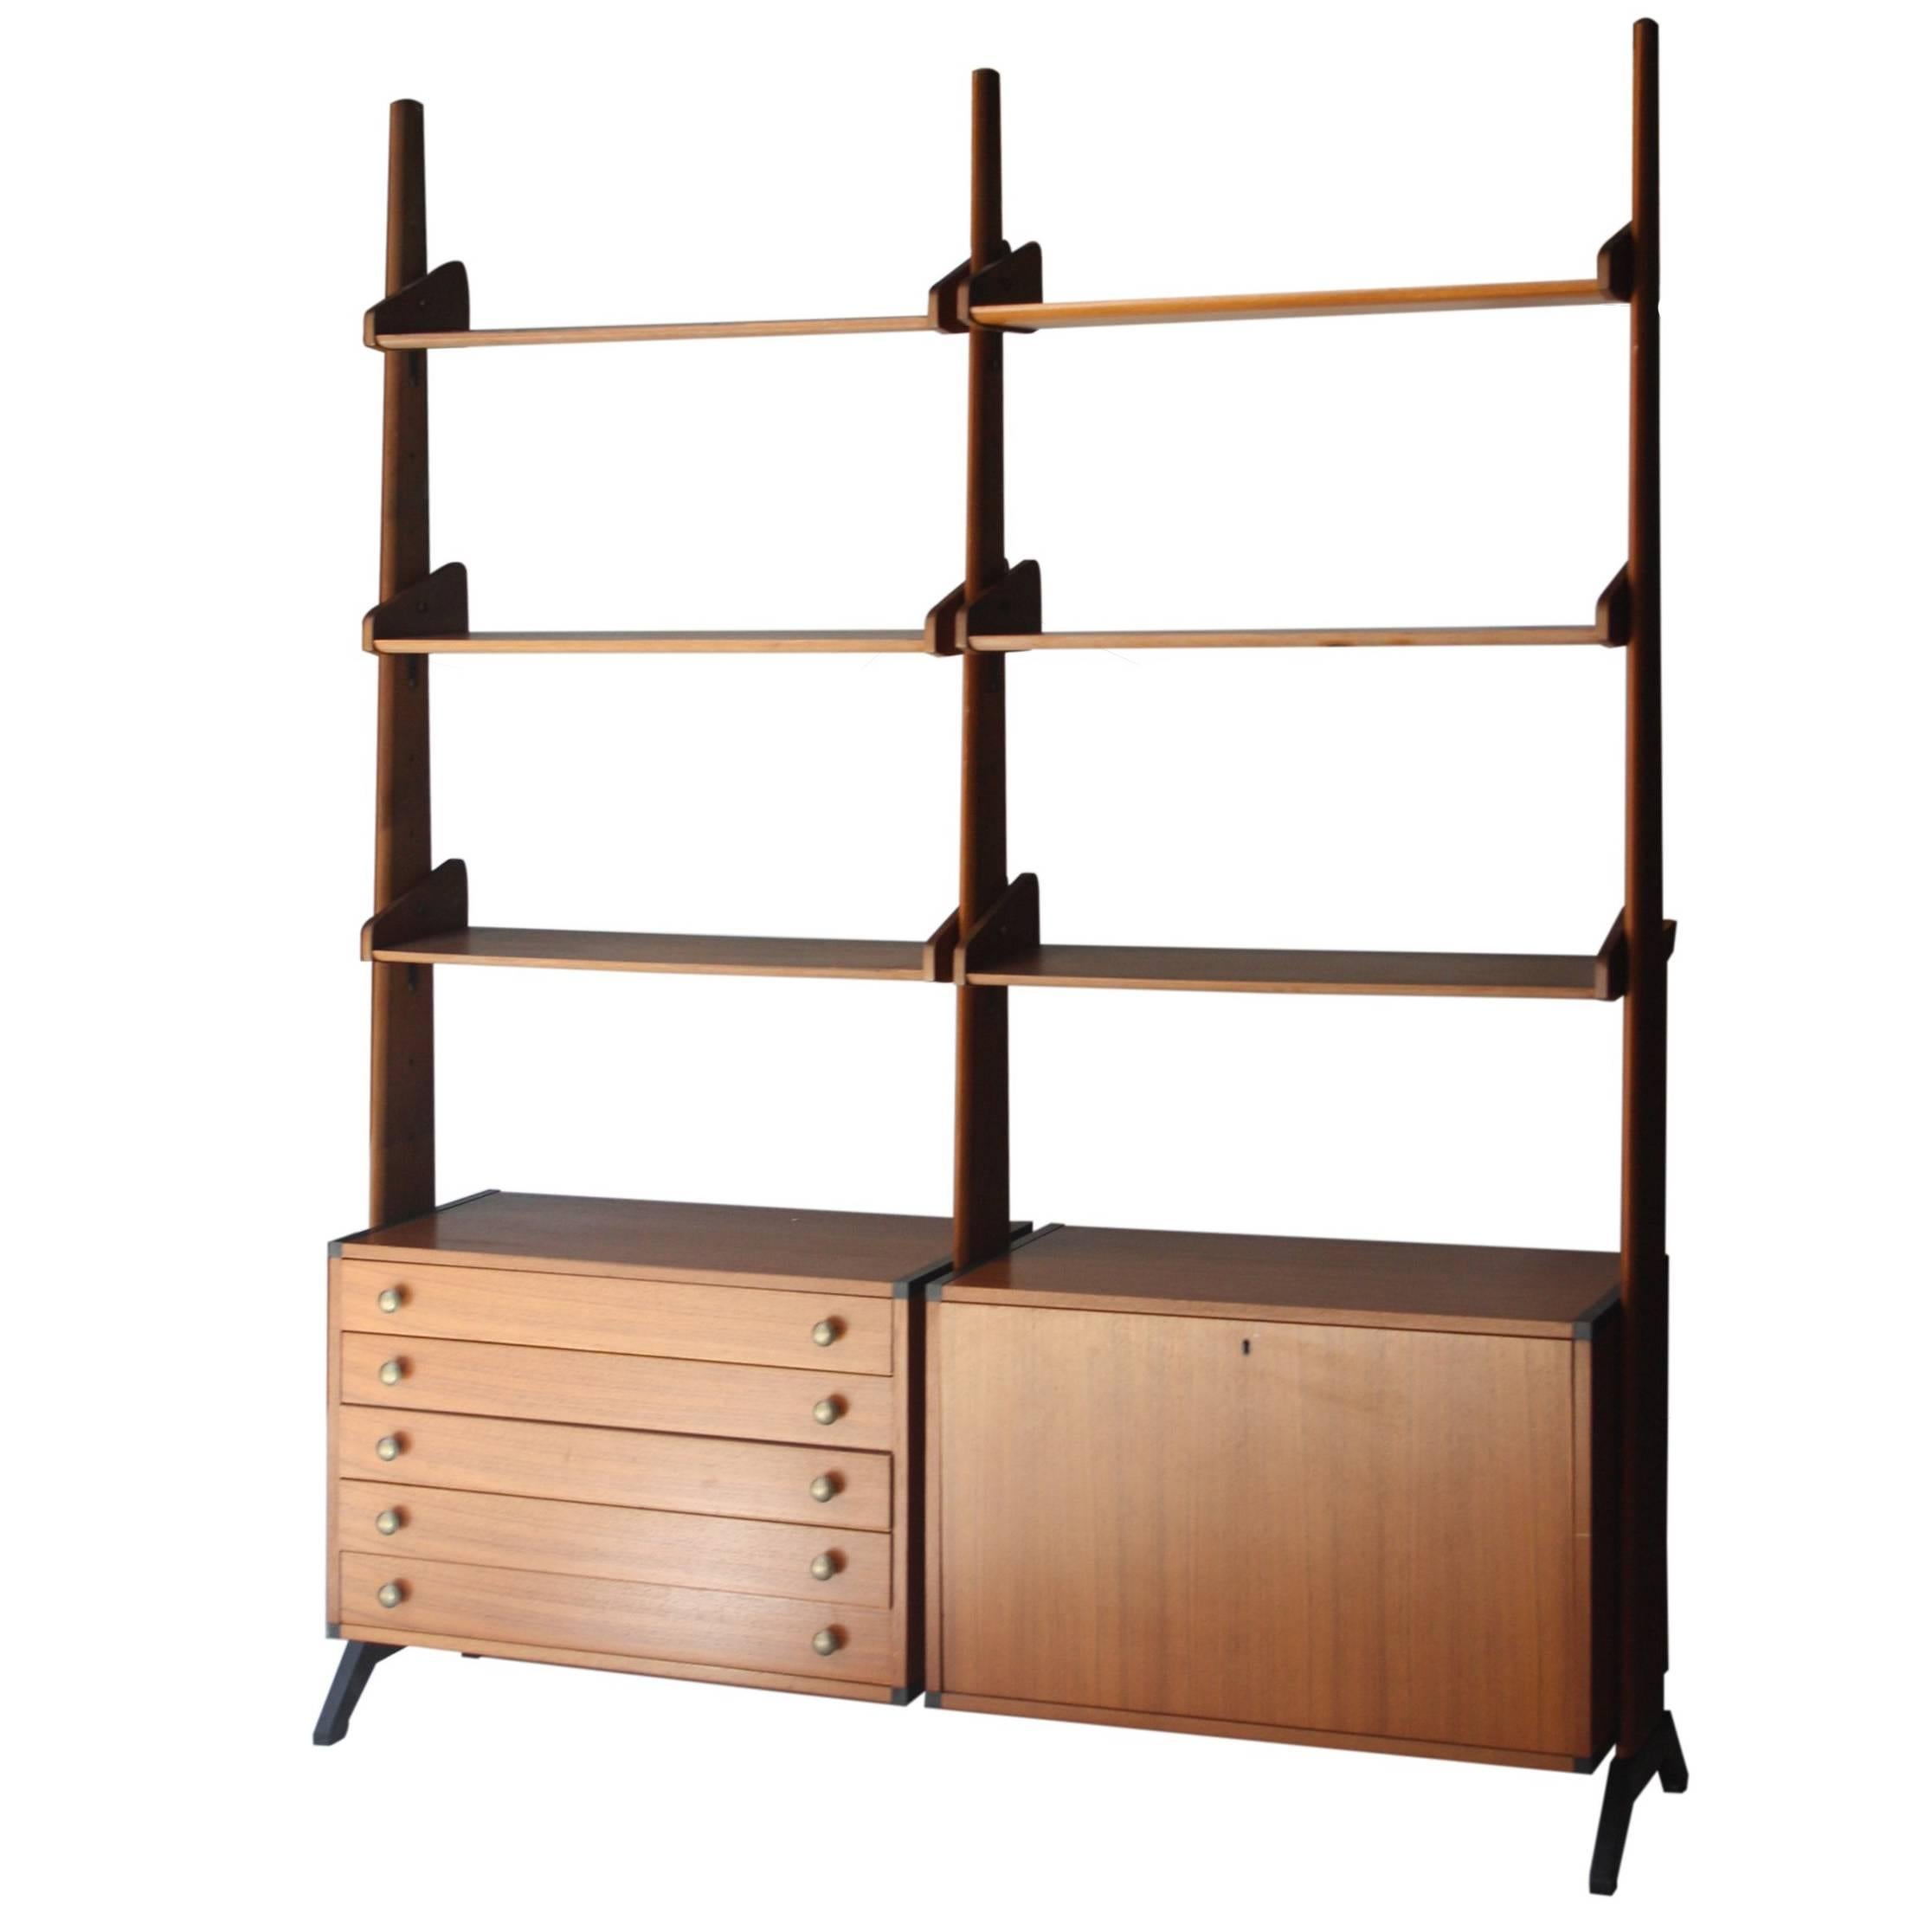 Shelf Made of Rosewood with Storage Module below, Italy, 1950